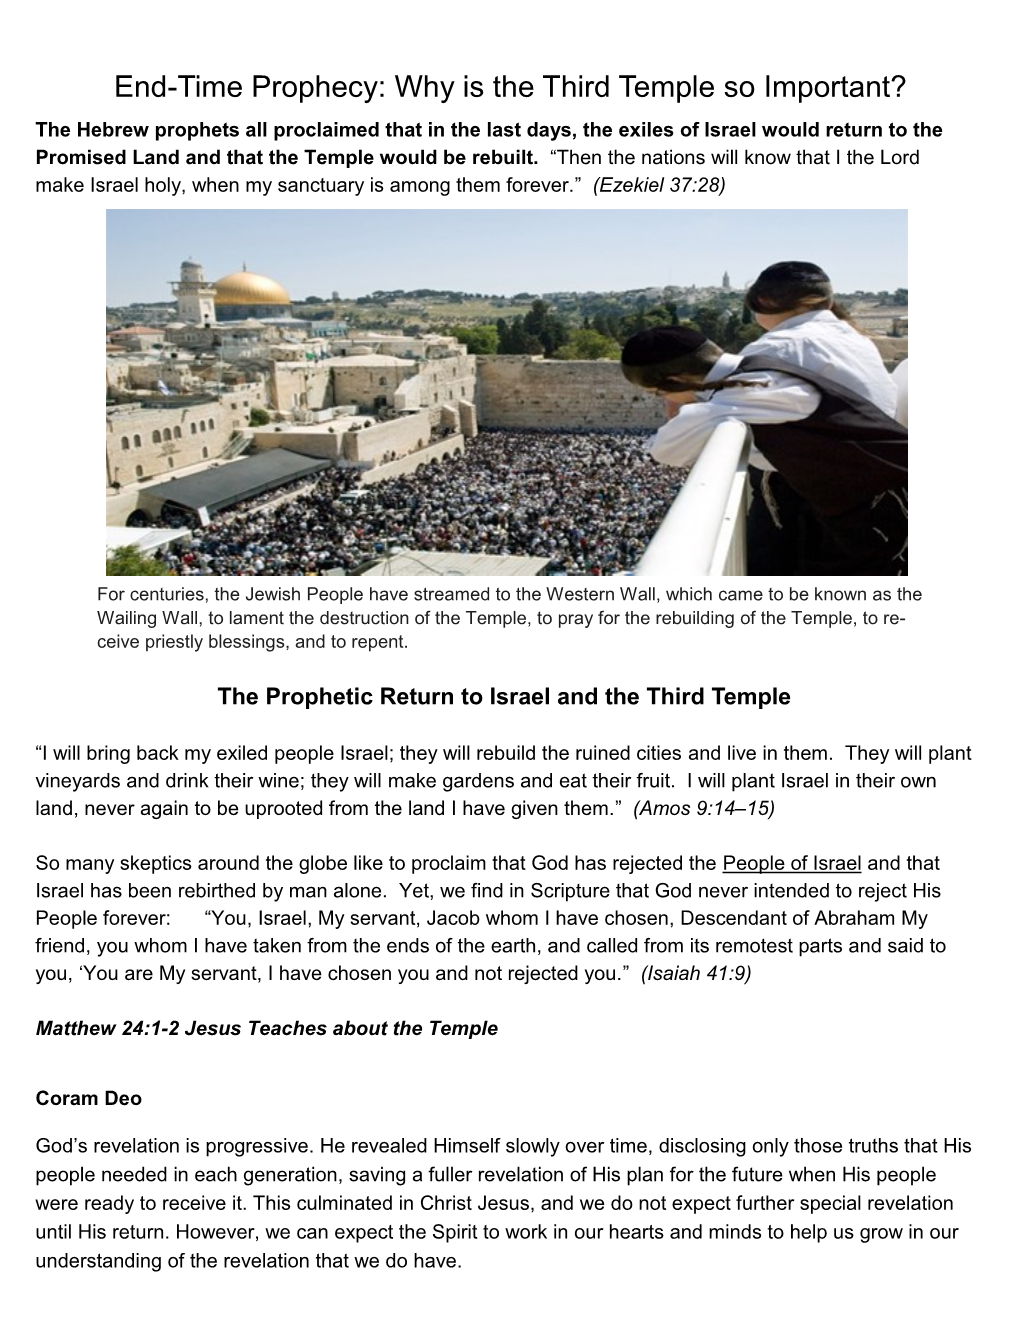 End-Time Prophecy: Why Is the Third Temple So Important?